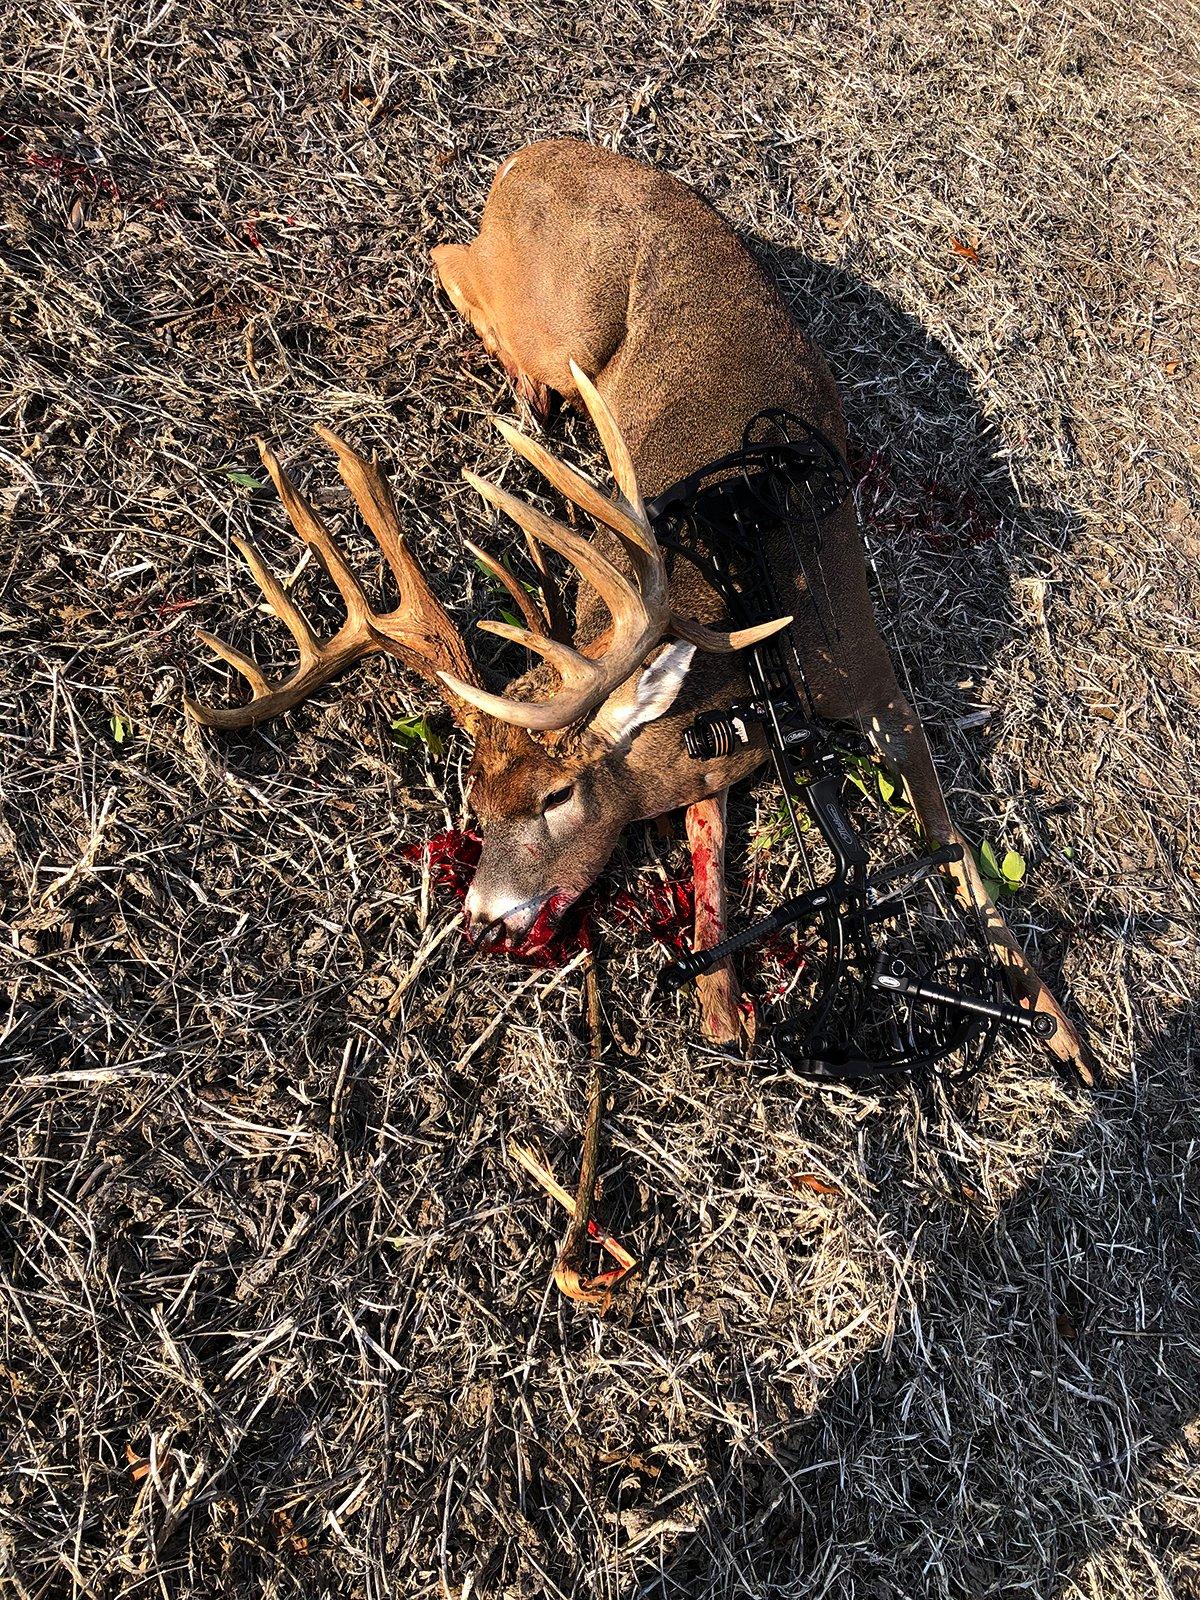 Less than a minute expired between first sight of the buck and the time it was down.